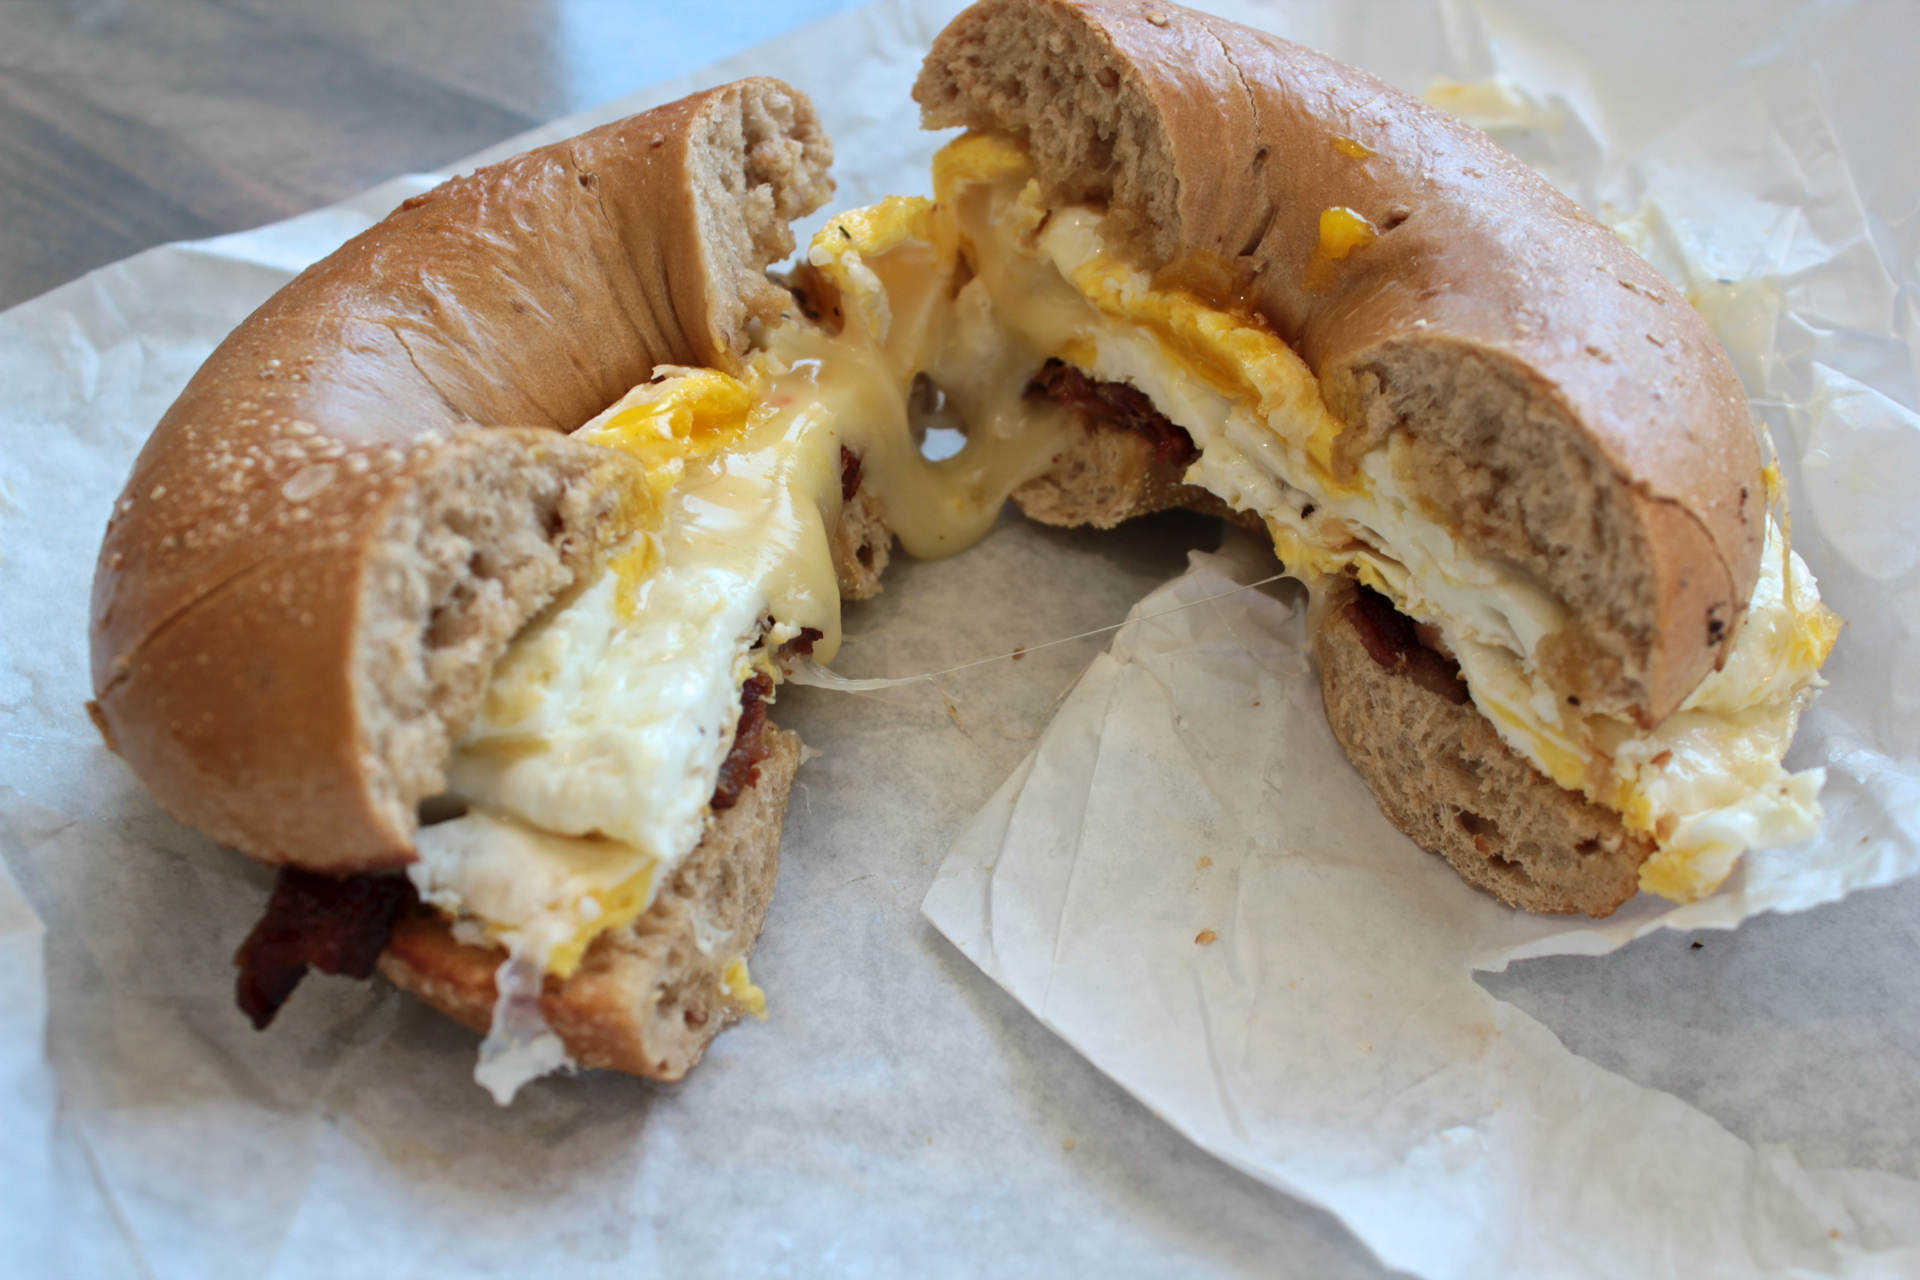 A Bagel Guy sandwich with a fried egg, pepper jack cheese and bacon on a multigrain bagel.